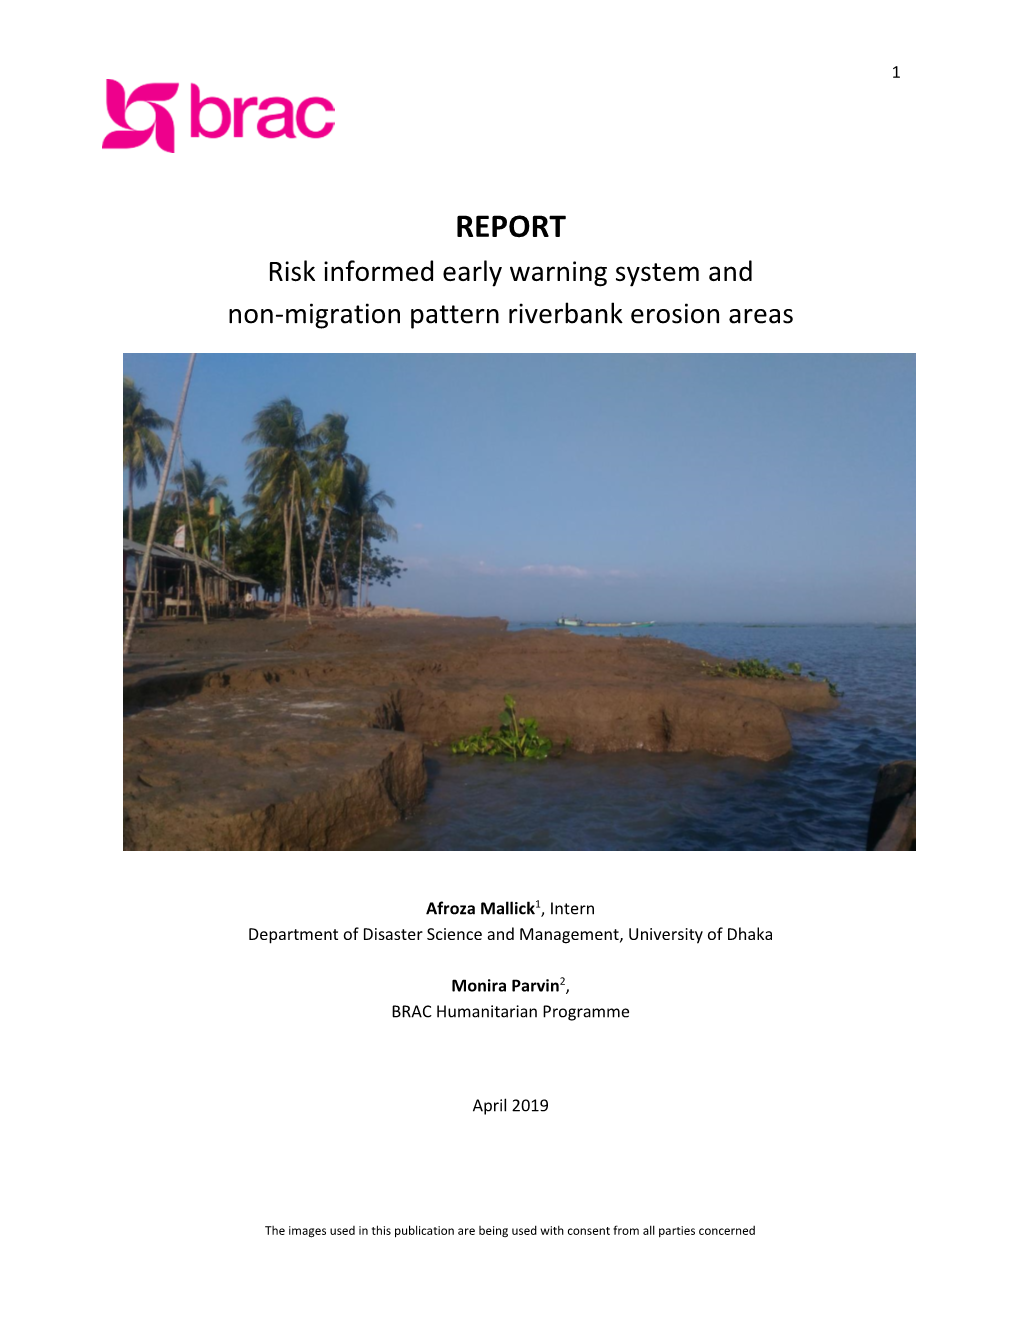 REPORT Risk Informed Early Warning System and Non-Migration Pattern Riverbank Erosion Areas